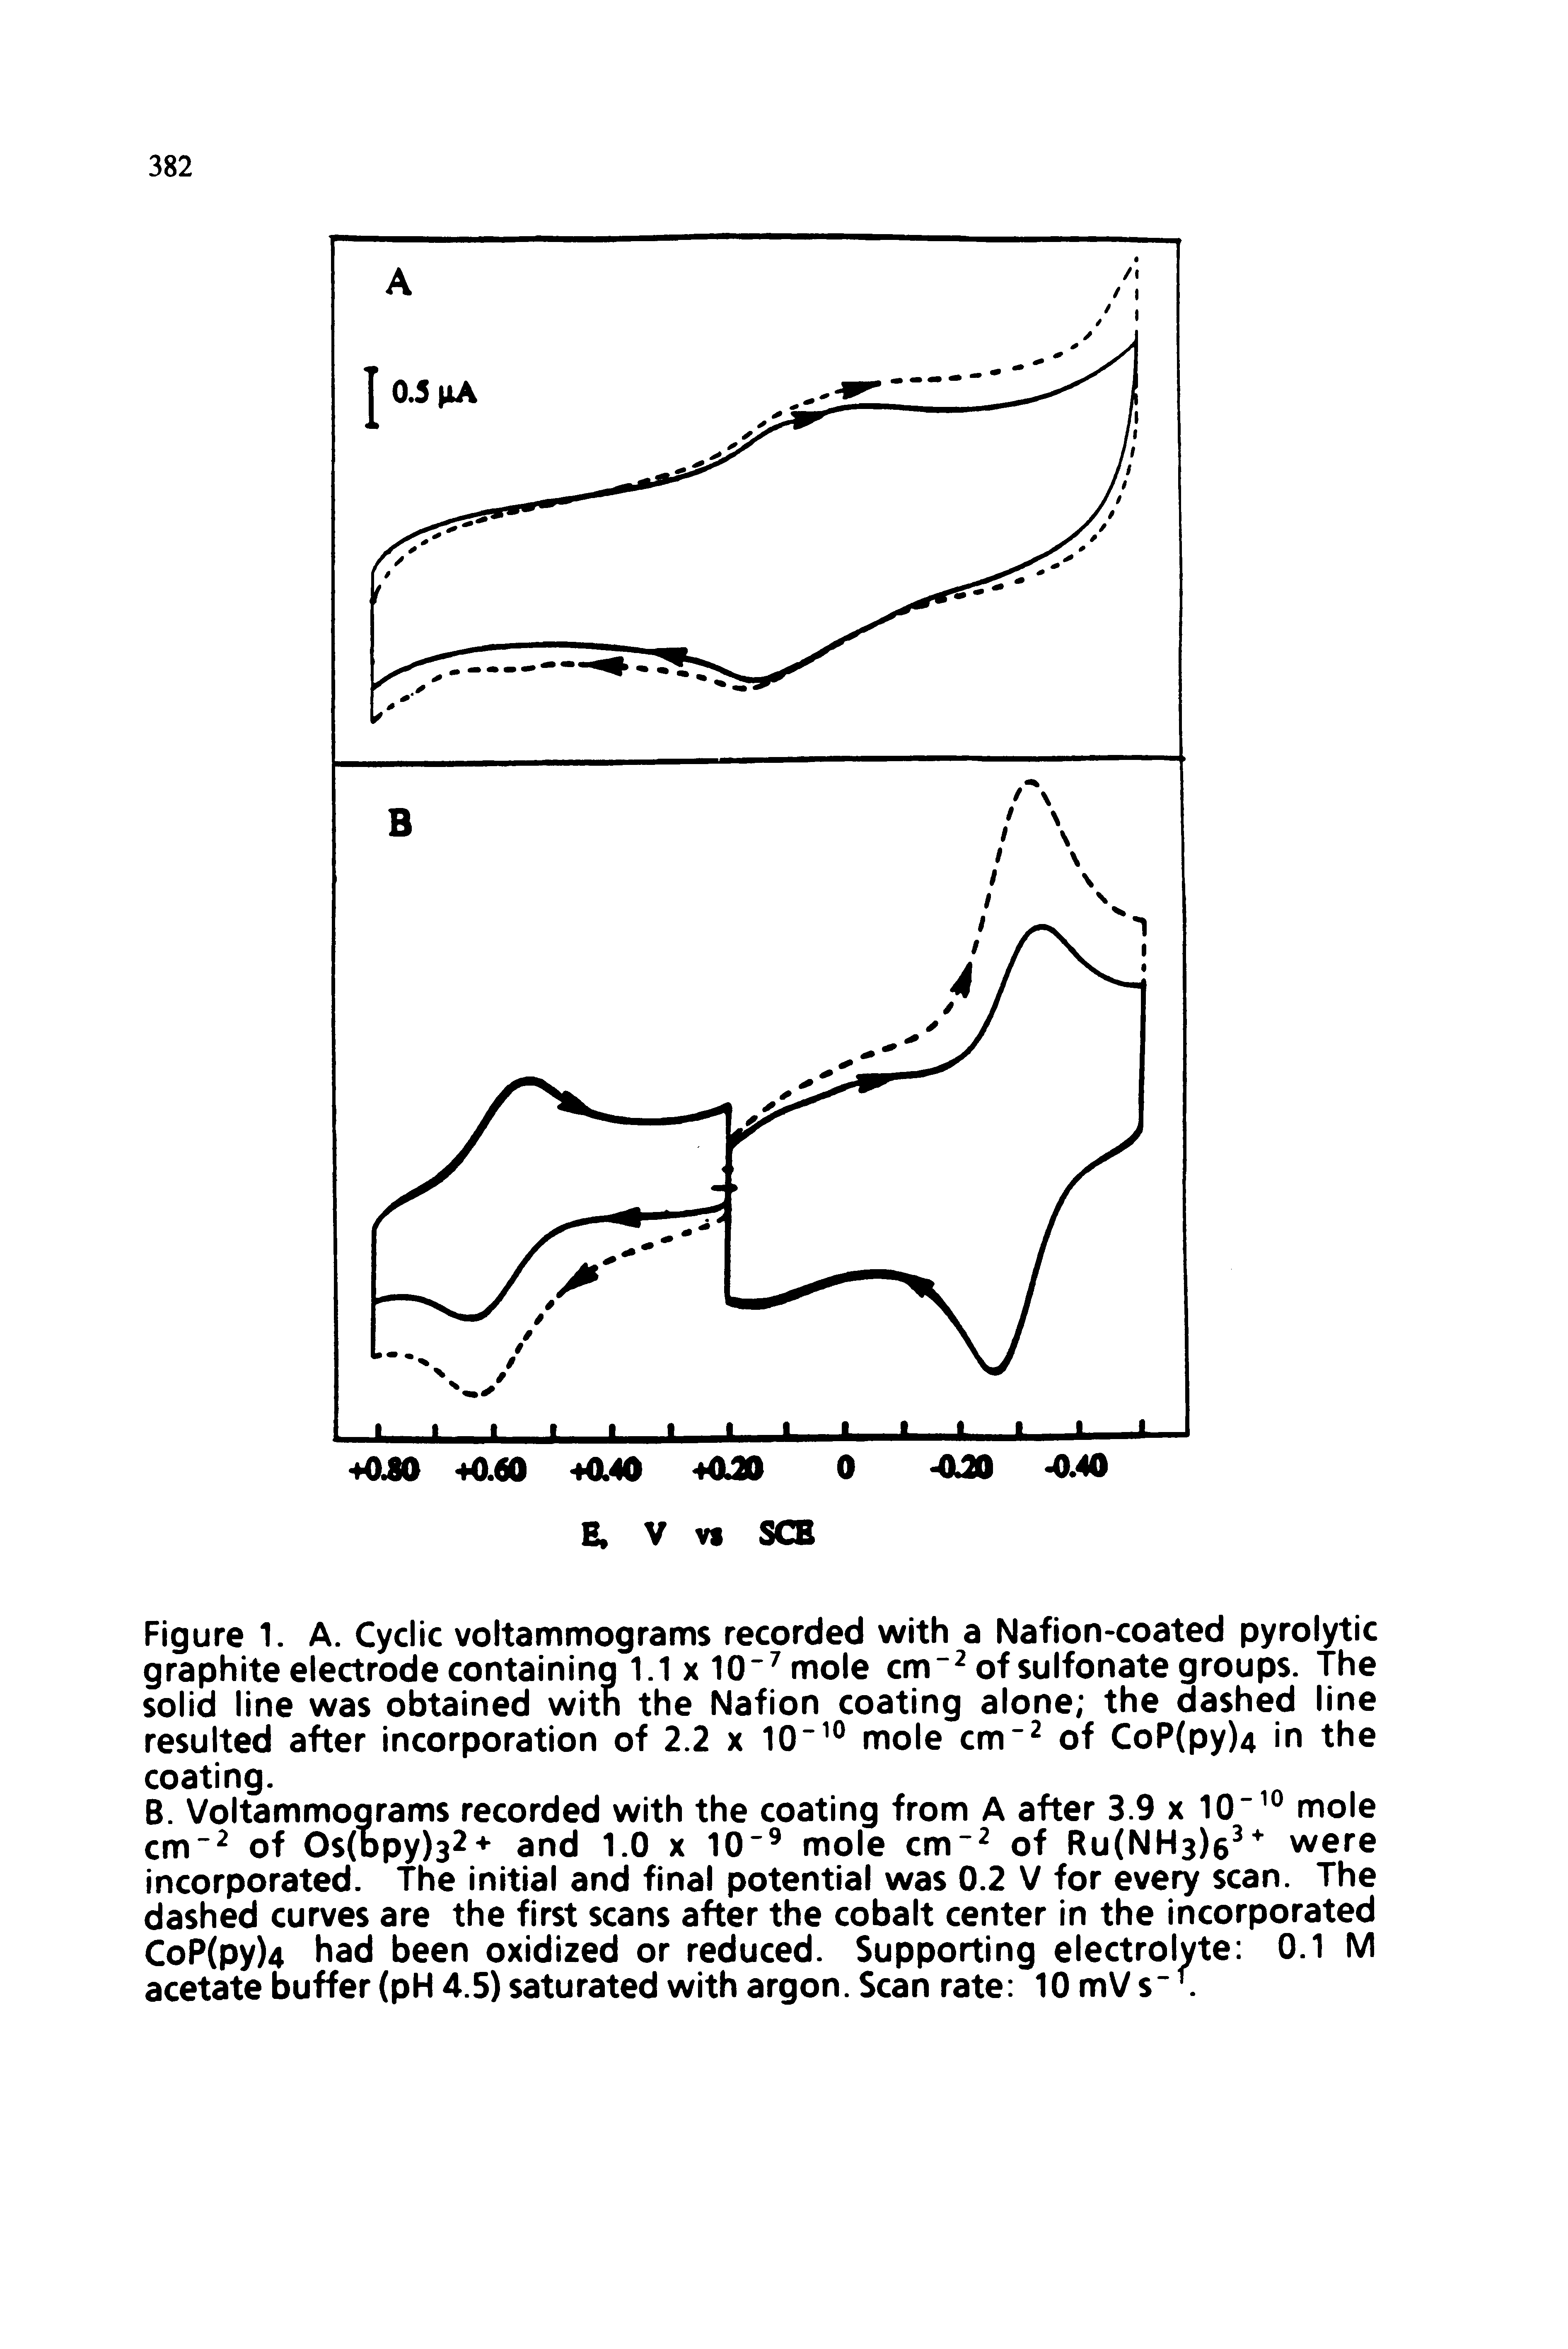 Figure 1. A. Cyclic voltammograms recorded with a Nafion-coated pyrolytic graphite electrode containing 1.1 x 10" mole cm of sulfonate groups. The solid line was obtained witn the Nation coating alone the dashed line resulted after incorporation of 2.2 x 10" ° mole cm of CoP(py)4 in the coating.